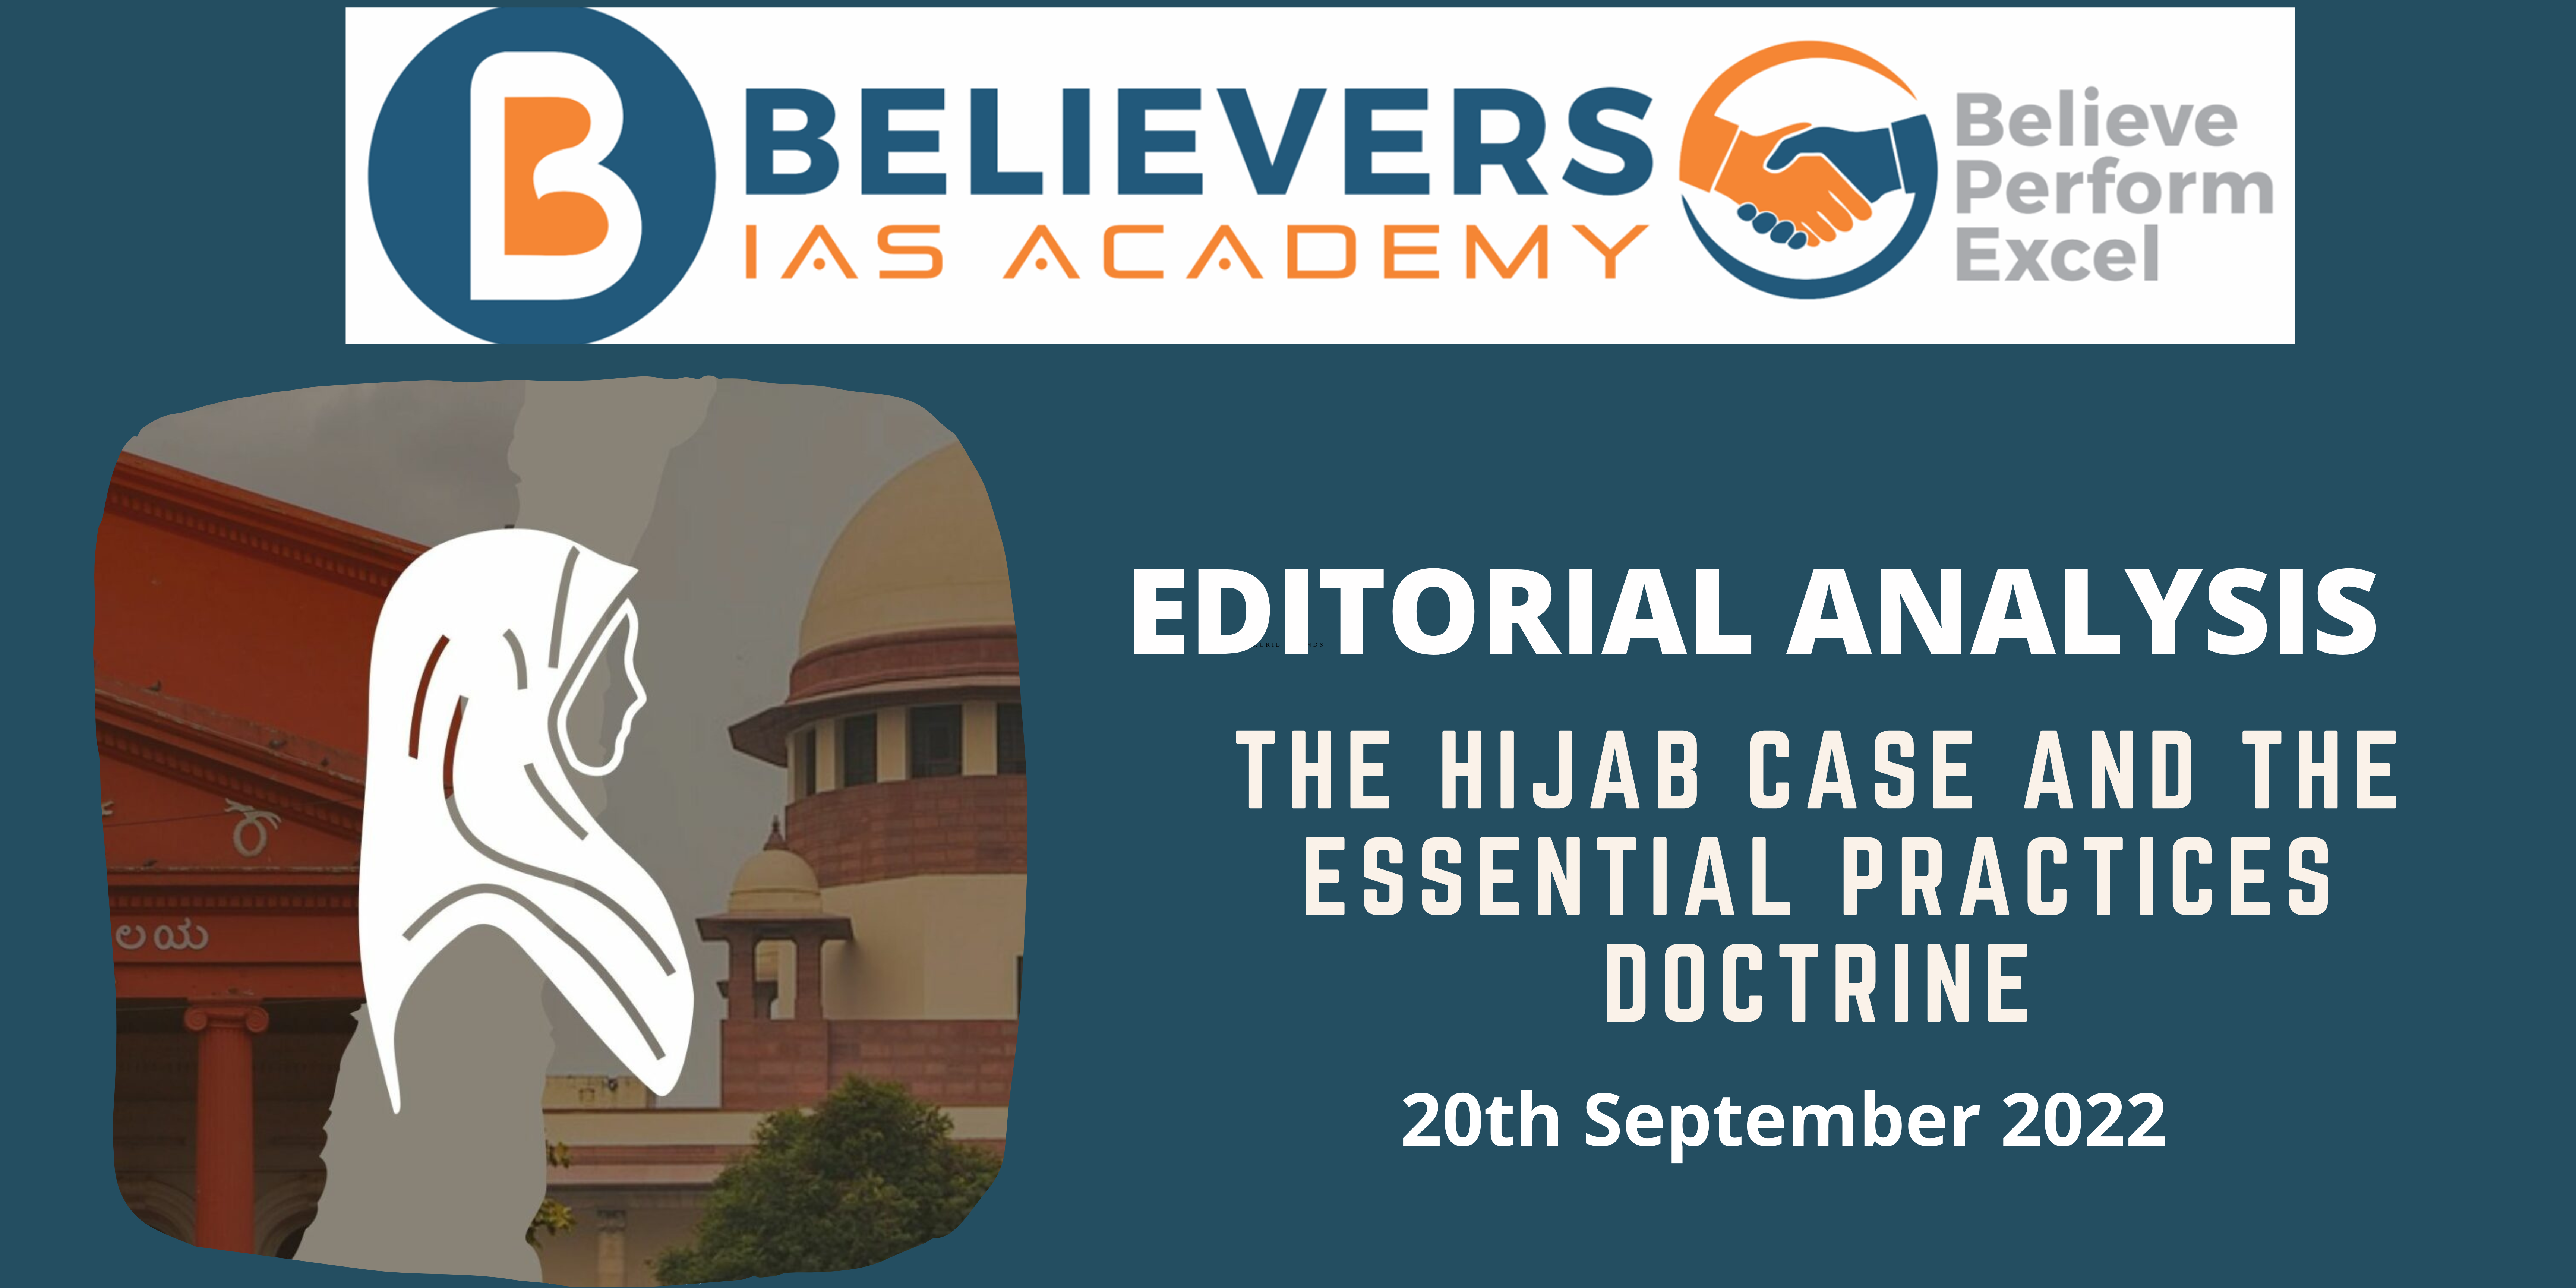 The hijab case and the essential practices doctrine